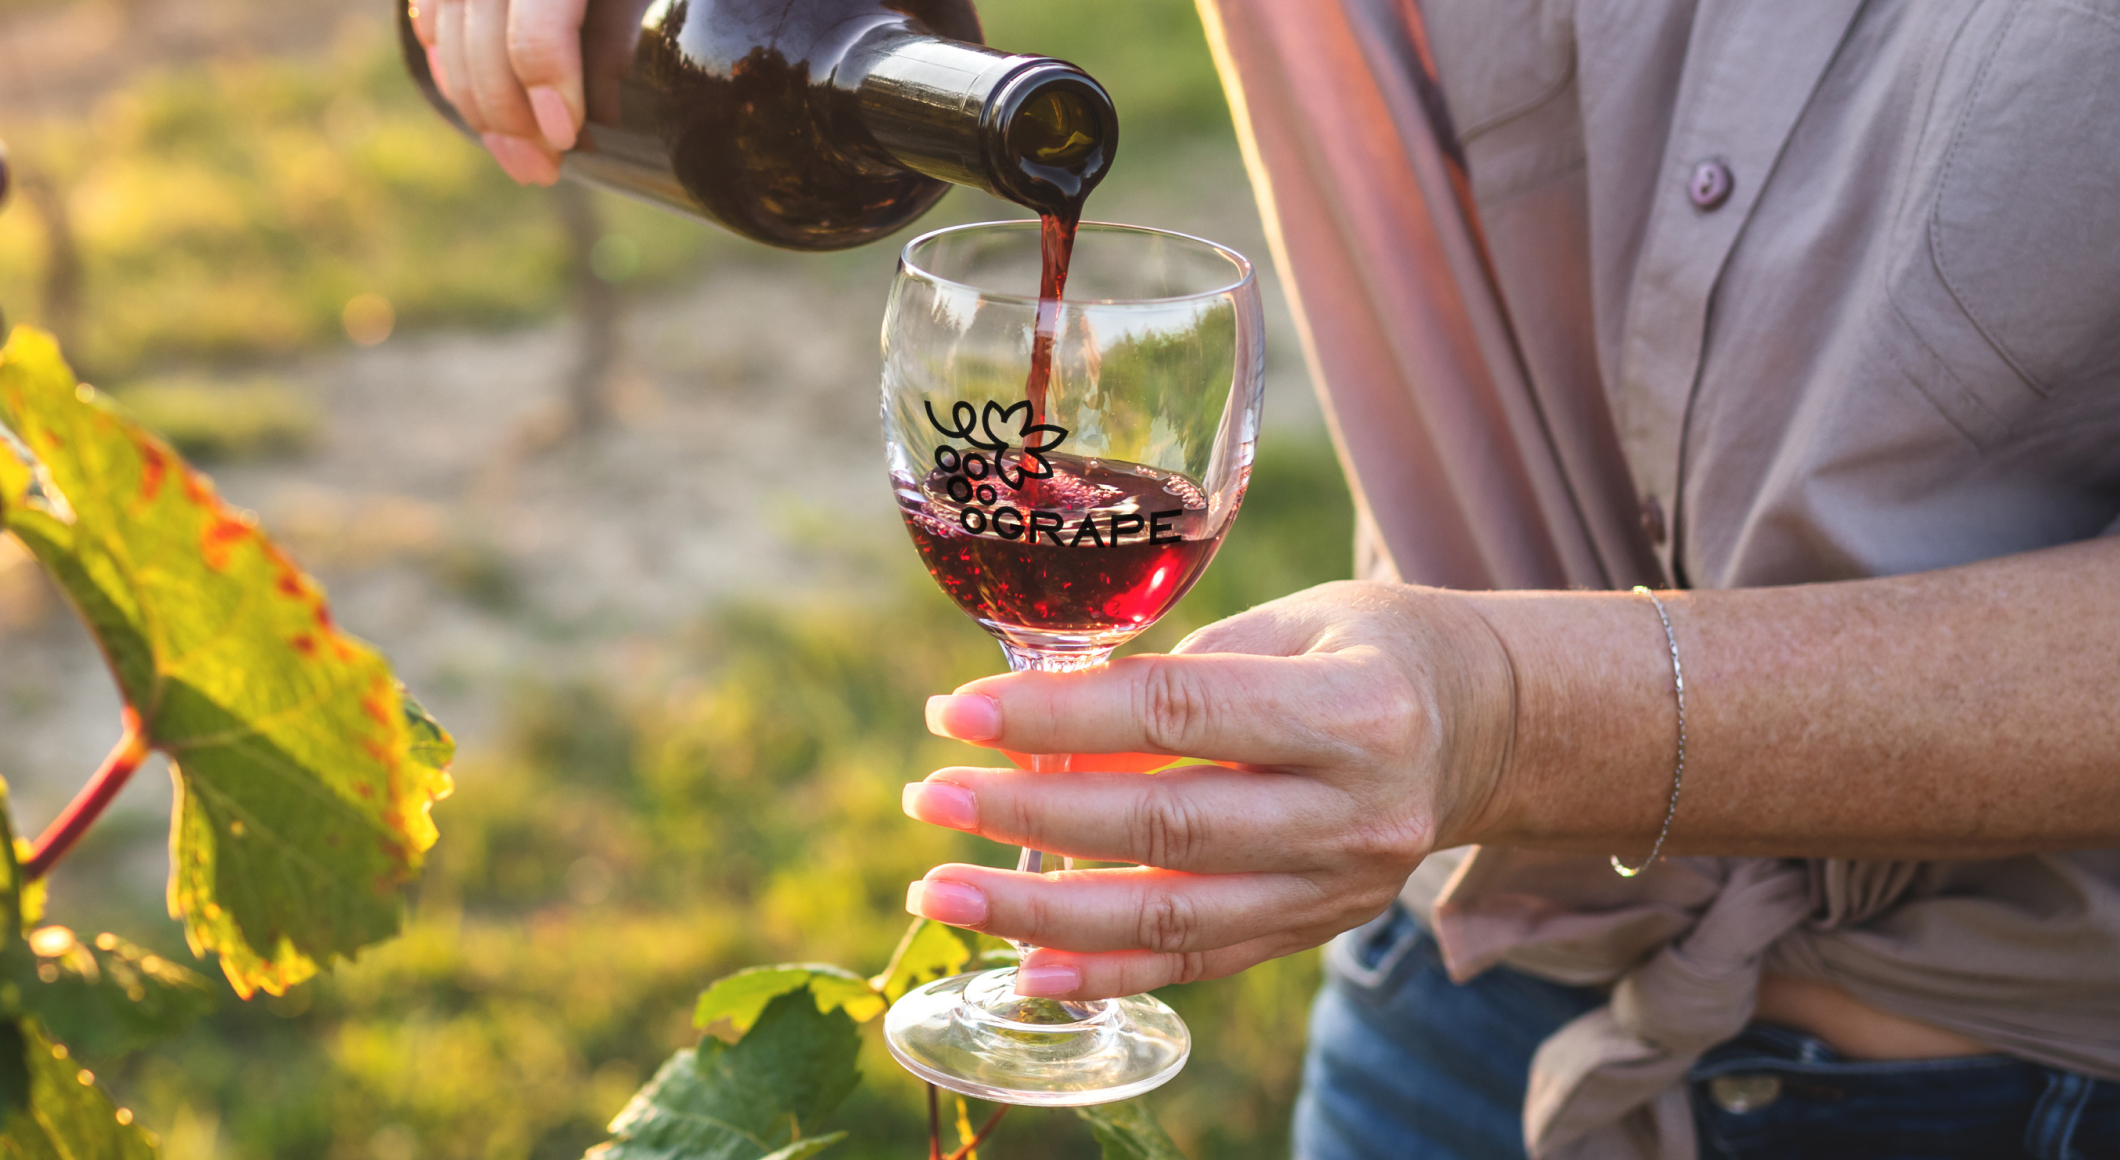 Person with vineyard in background, pouring wine into custom wine glass with logo